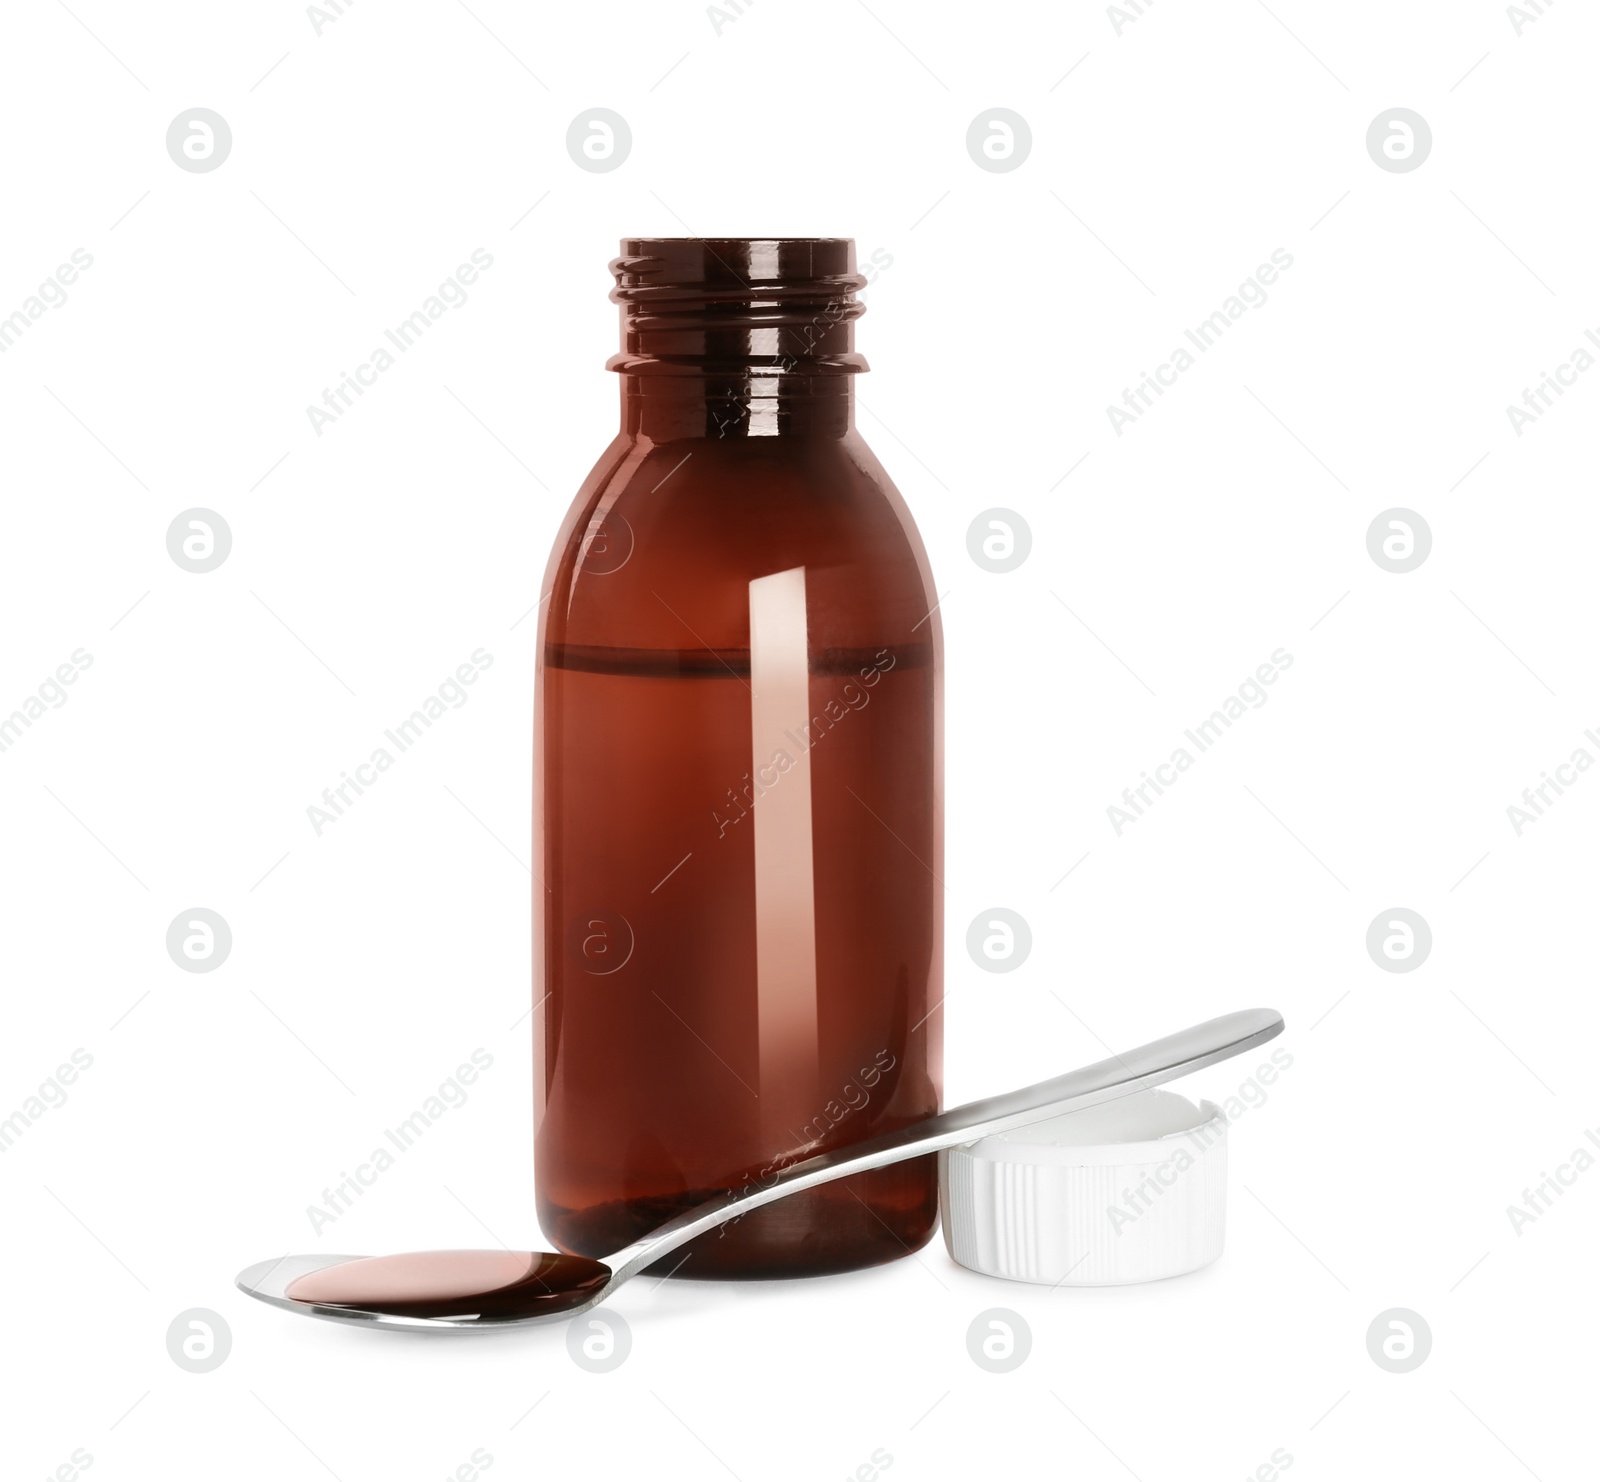 Photo of Bottle of cough syrup and spoon on white background